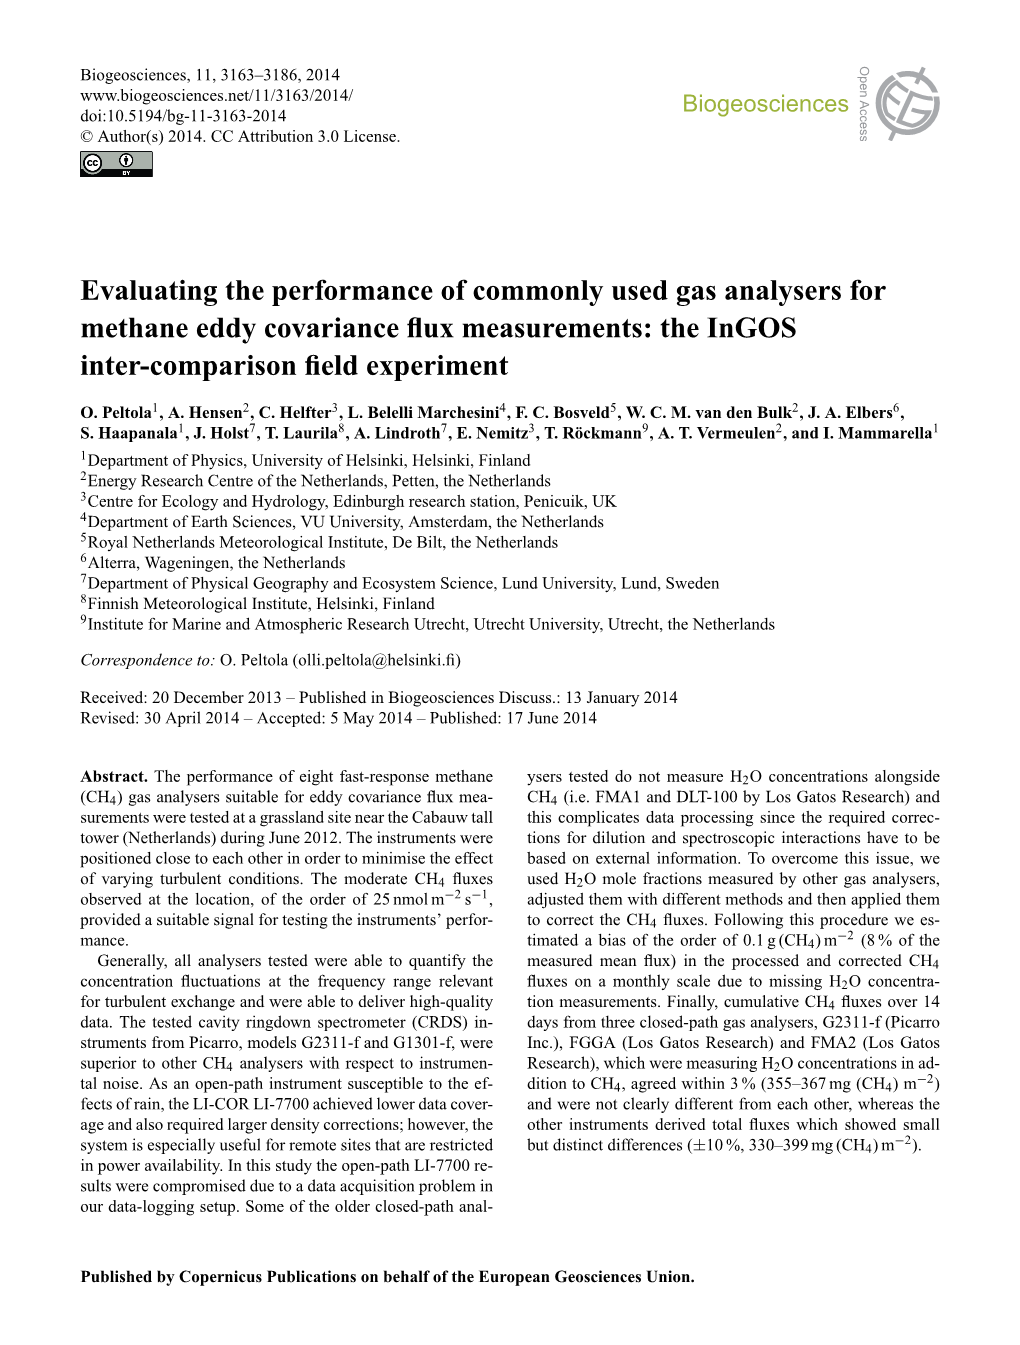 Evaluating the Performance of Commonly Used Gas Analysers for Methane Eddy Covariance Flux Measurements: the Ingos Inter-Comparison Field Experiment